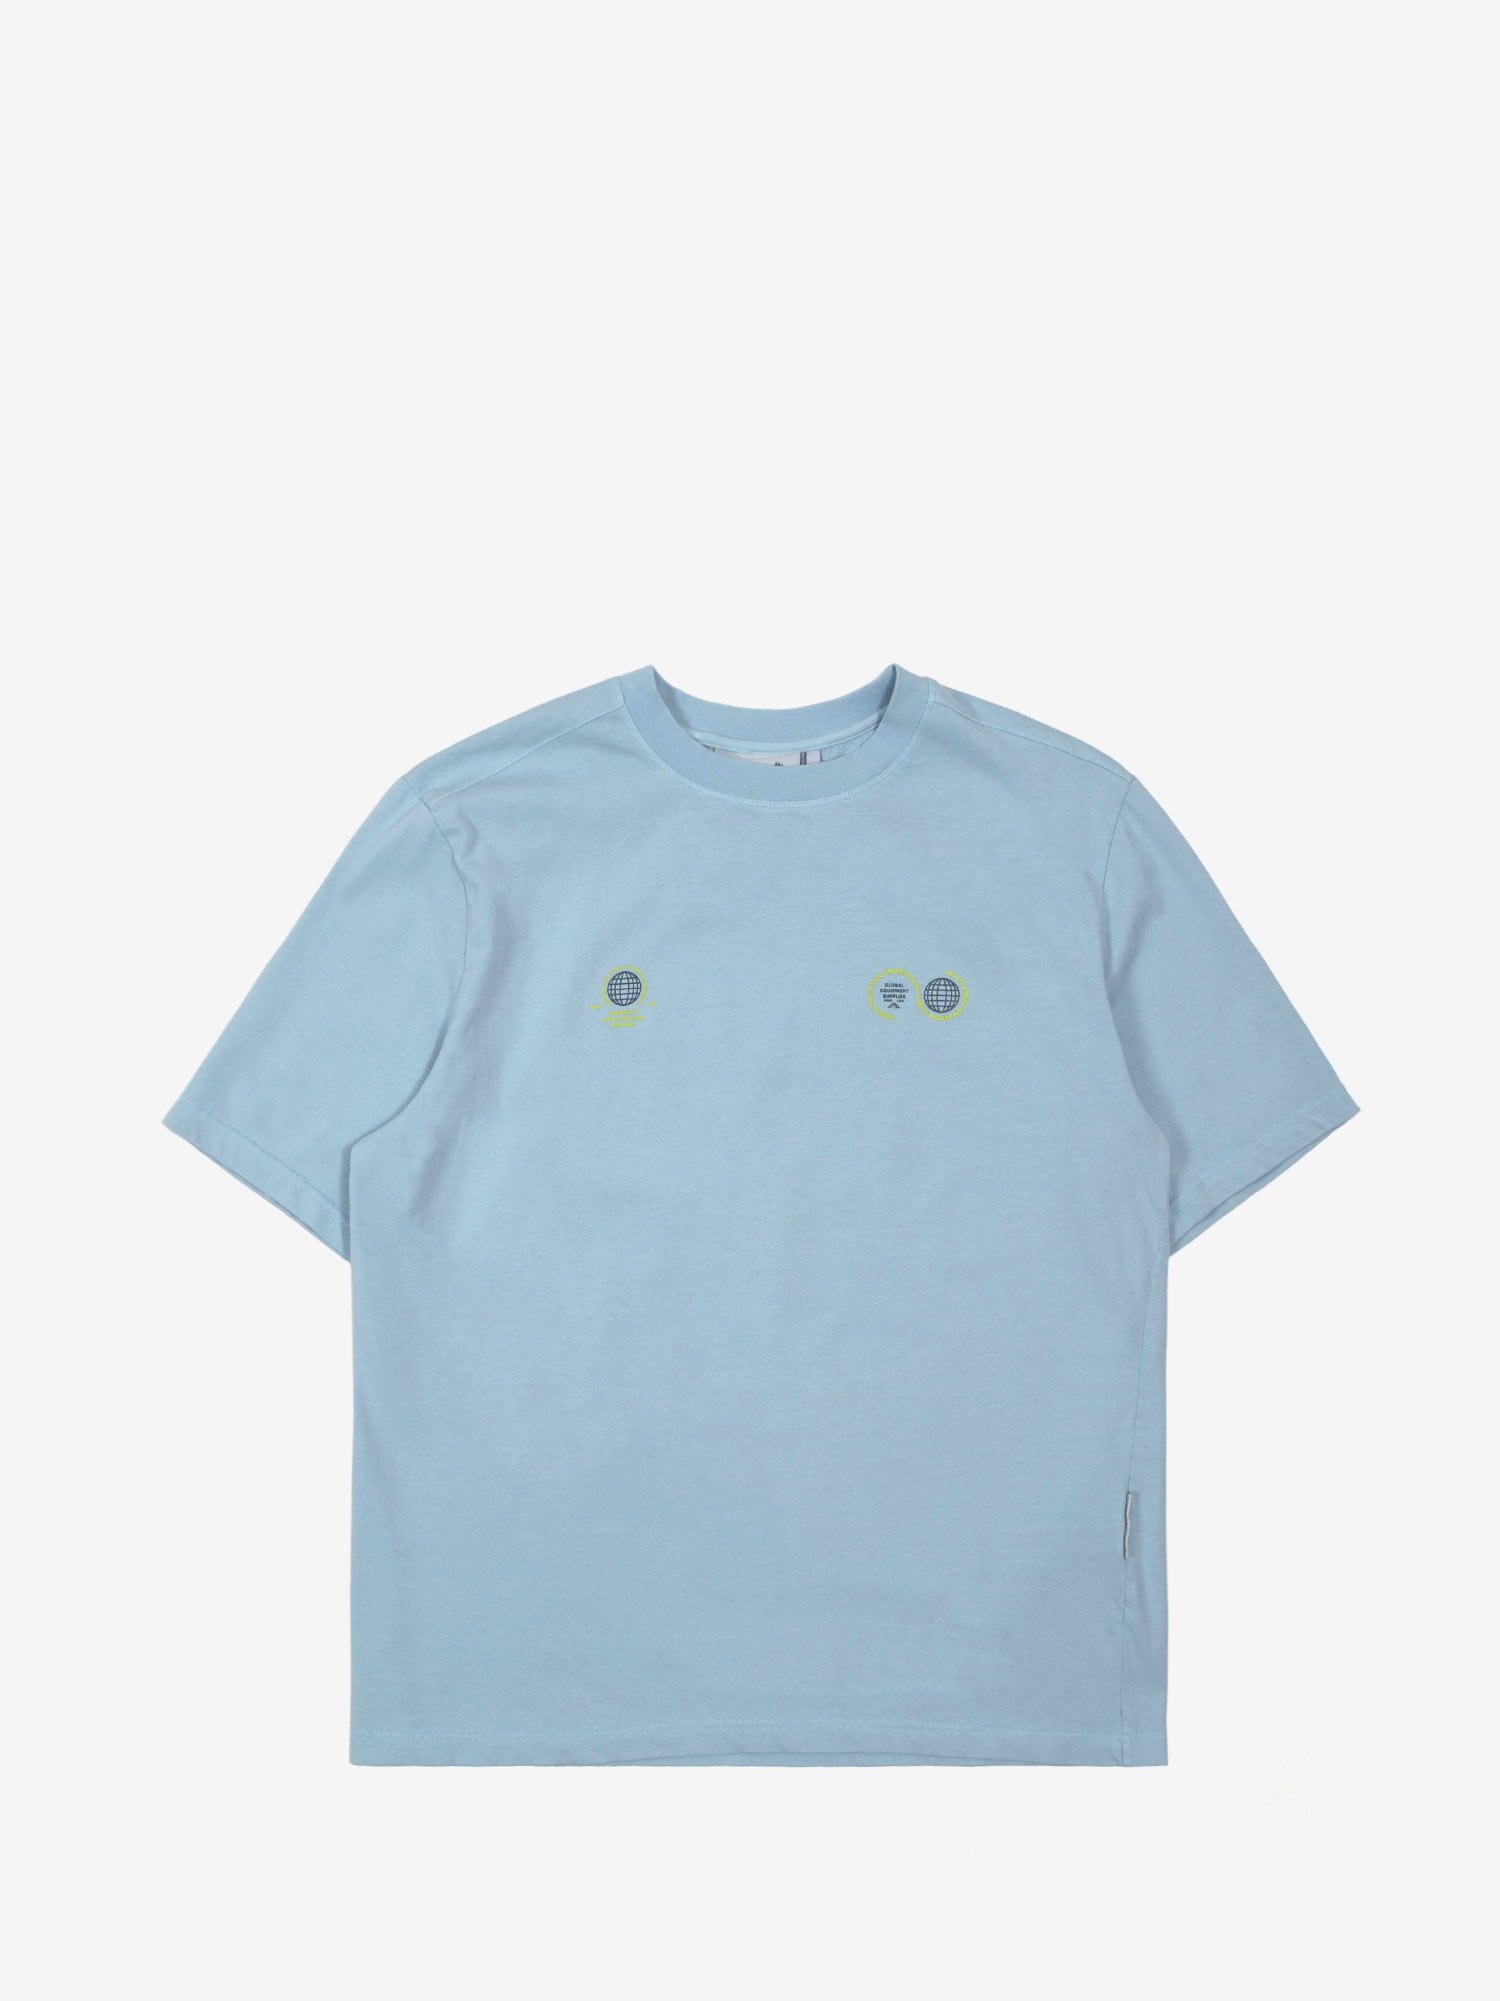 Featured image for “GLOBE SHORT SLEEVE T-SHIRT SKY BLUE”